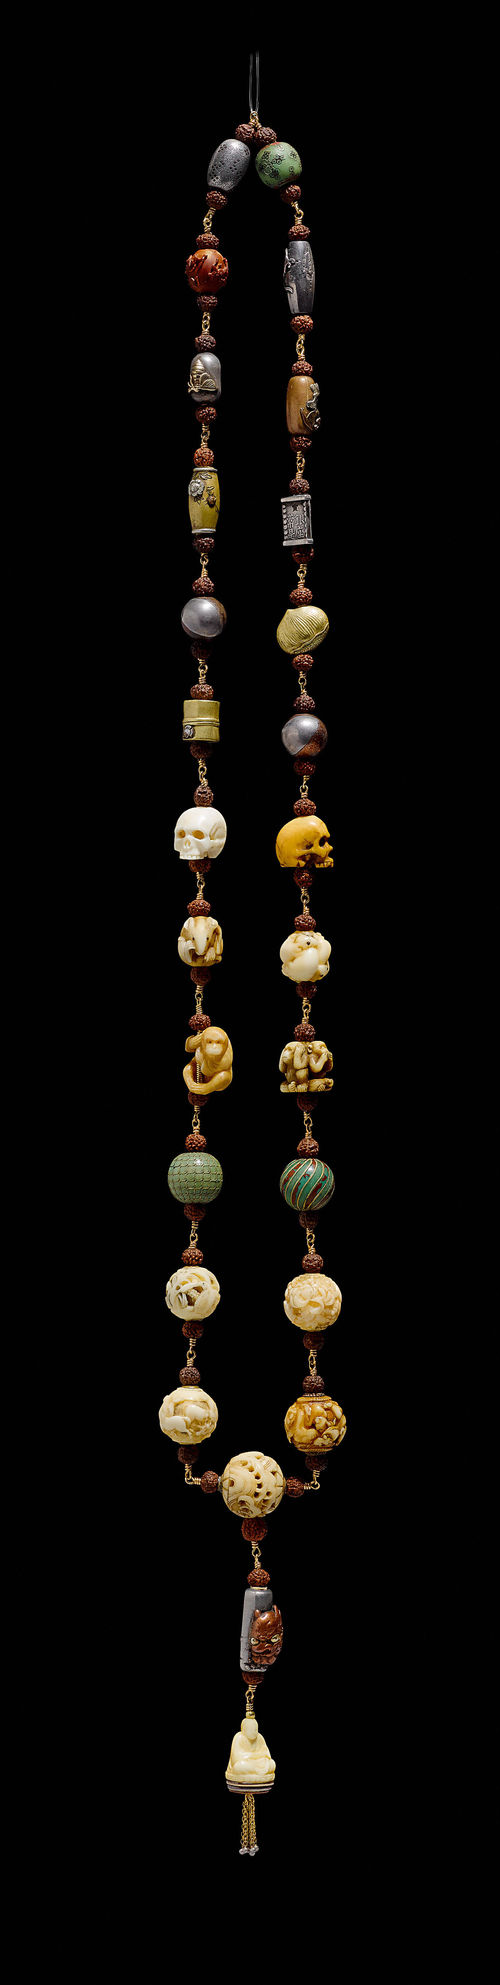 A FINE NECKLACE OF 26 OJIME AND A BUDDHA PENDANT.